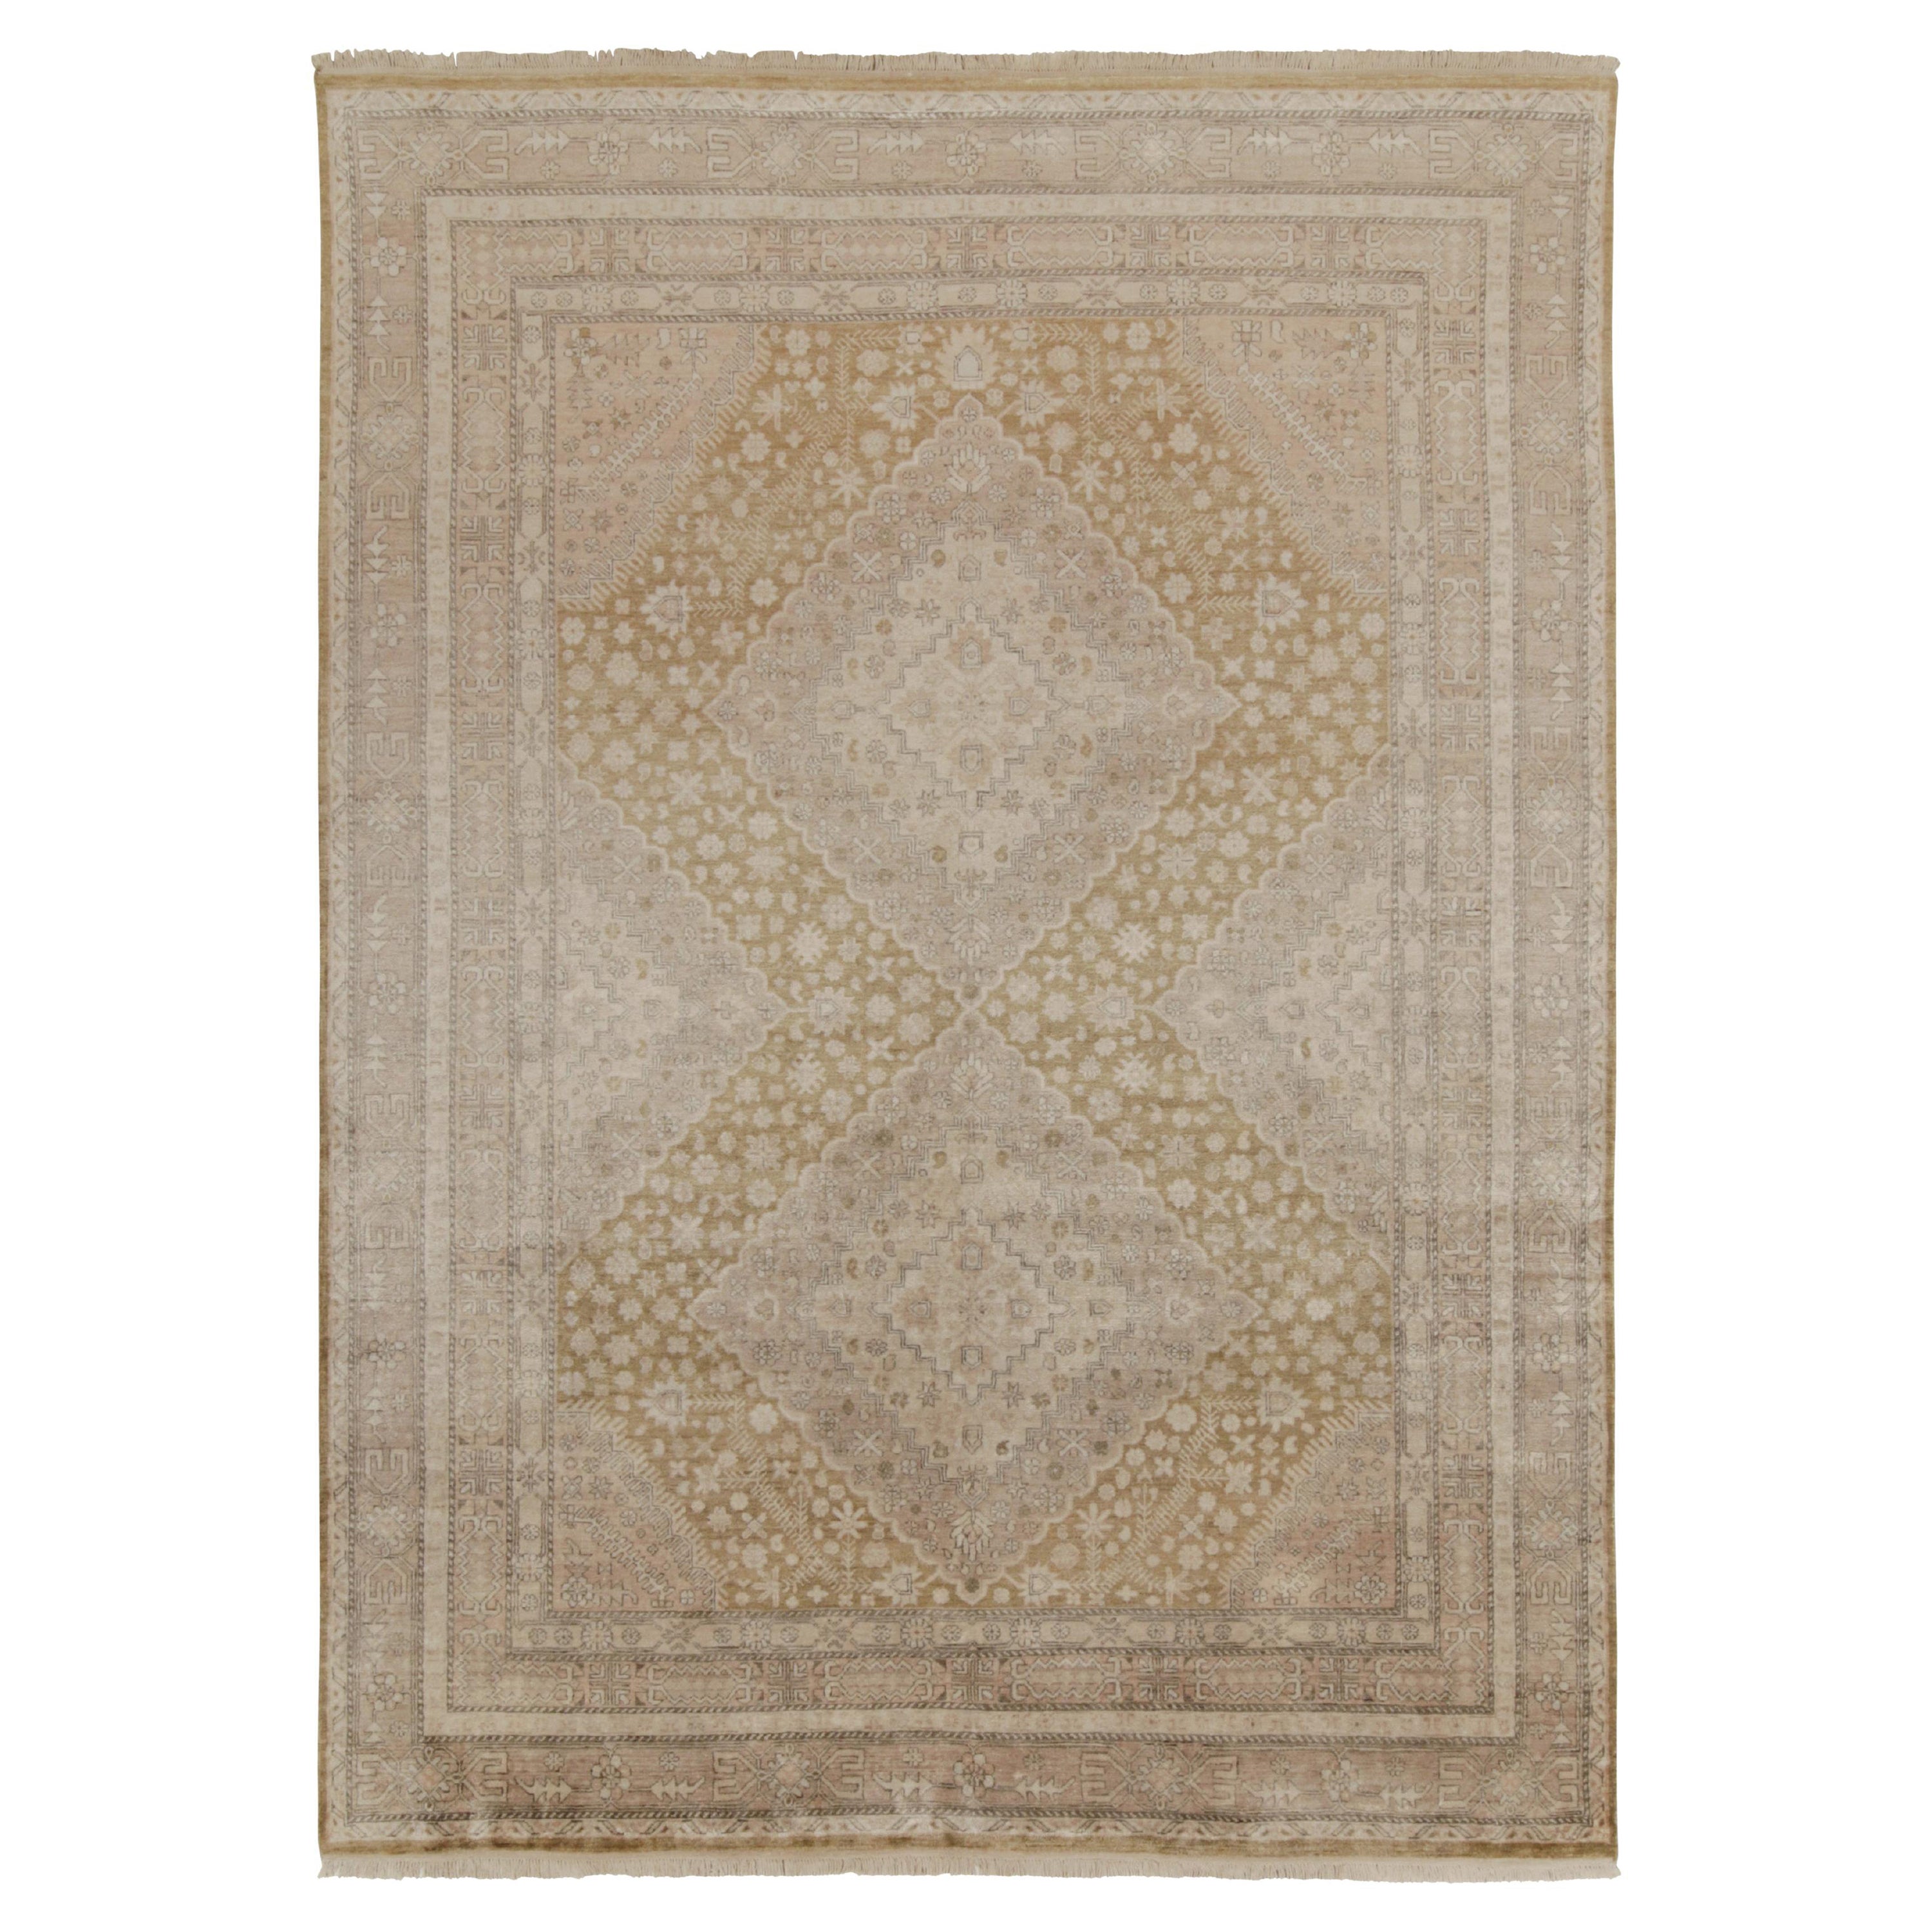 Rug & Kilim’s Classic Khotan Style Rug in Beige & Pink Diamonds, Floral Patterns For Sale